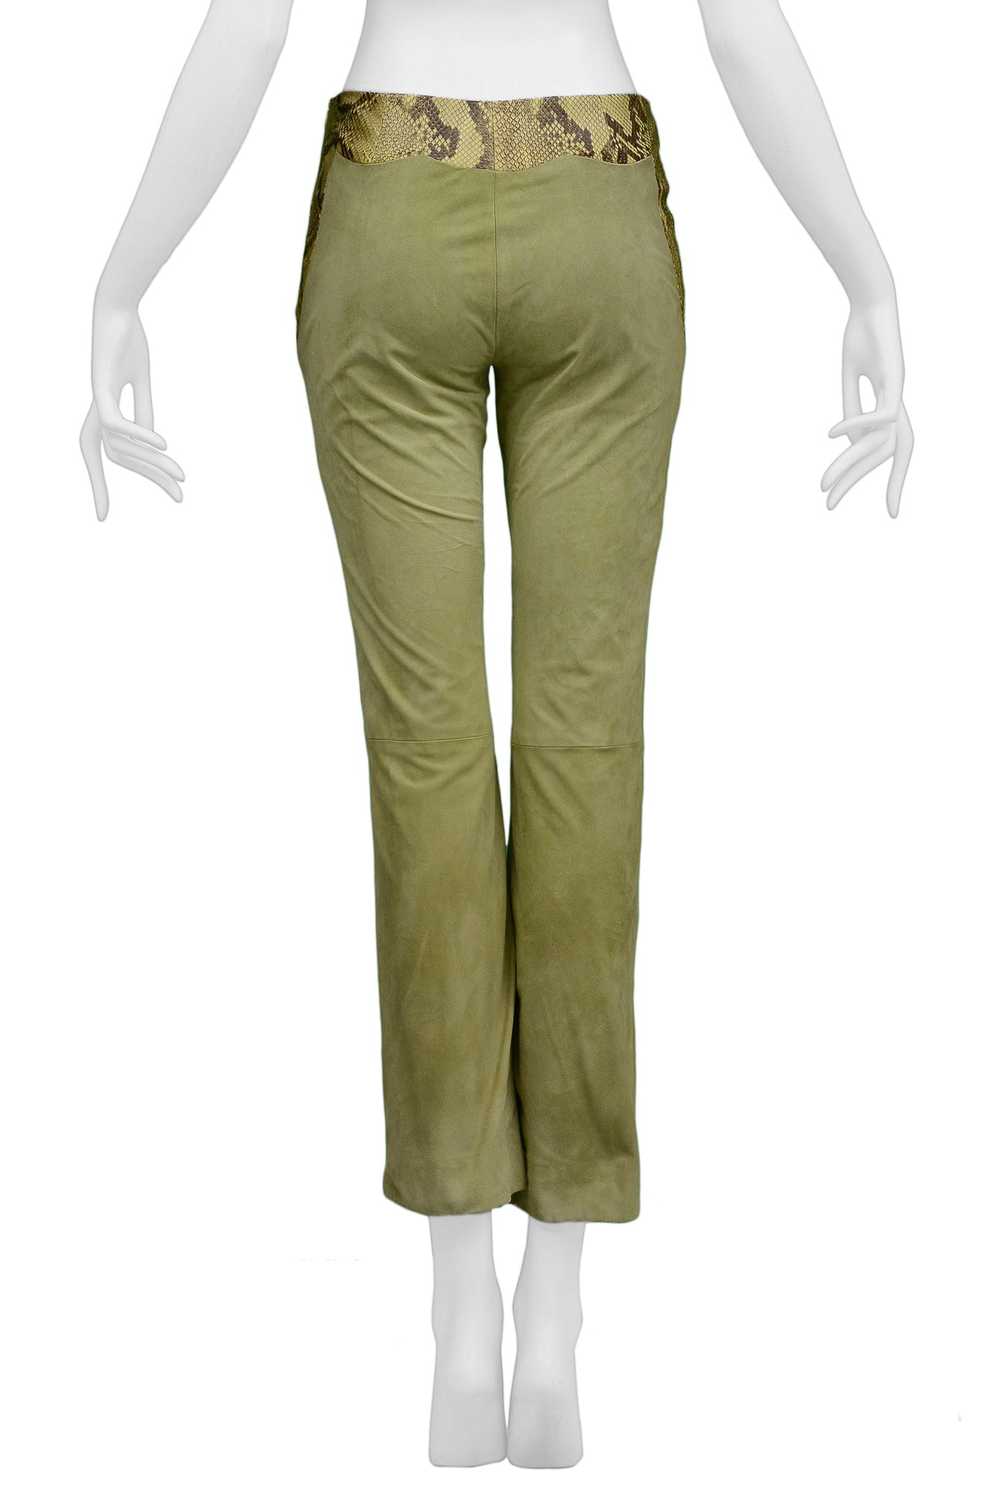 VERSACE GREEN SUEDE & LEATHER PANTS - image 2